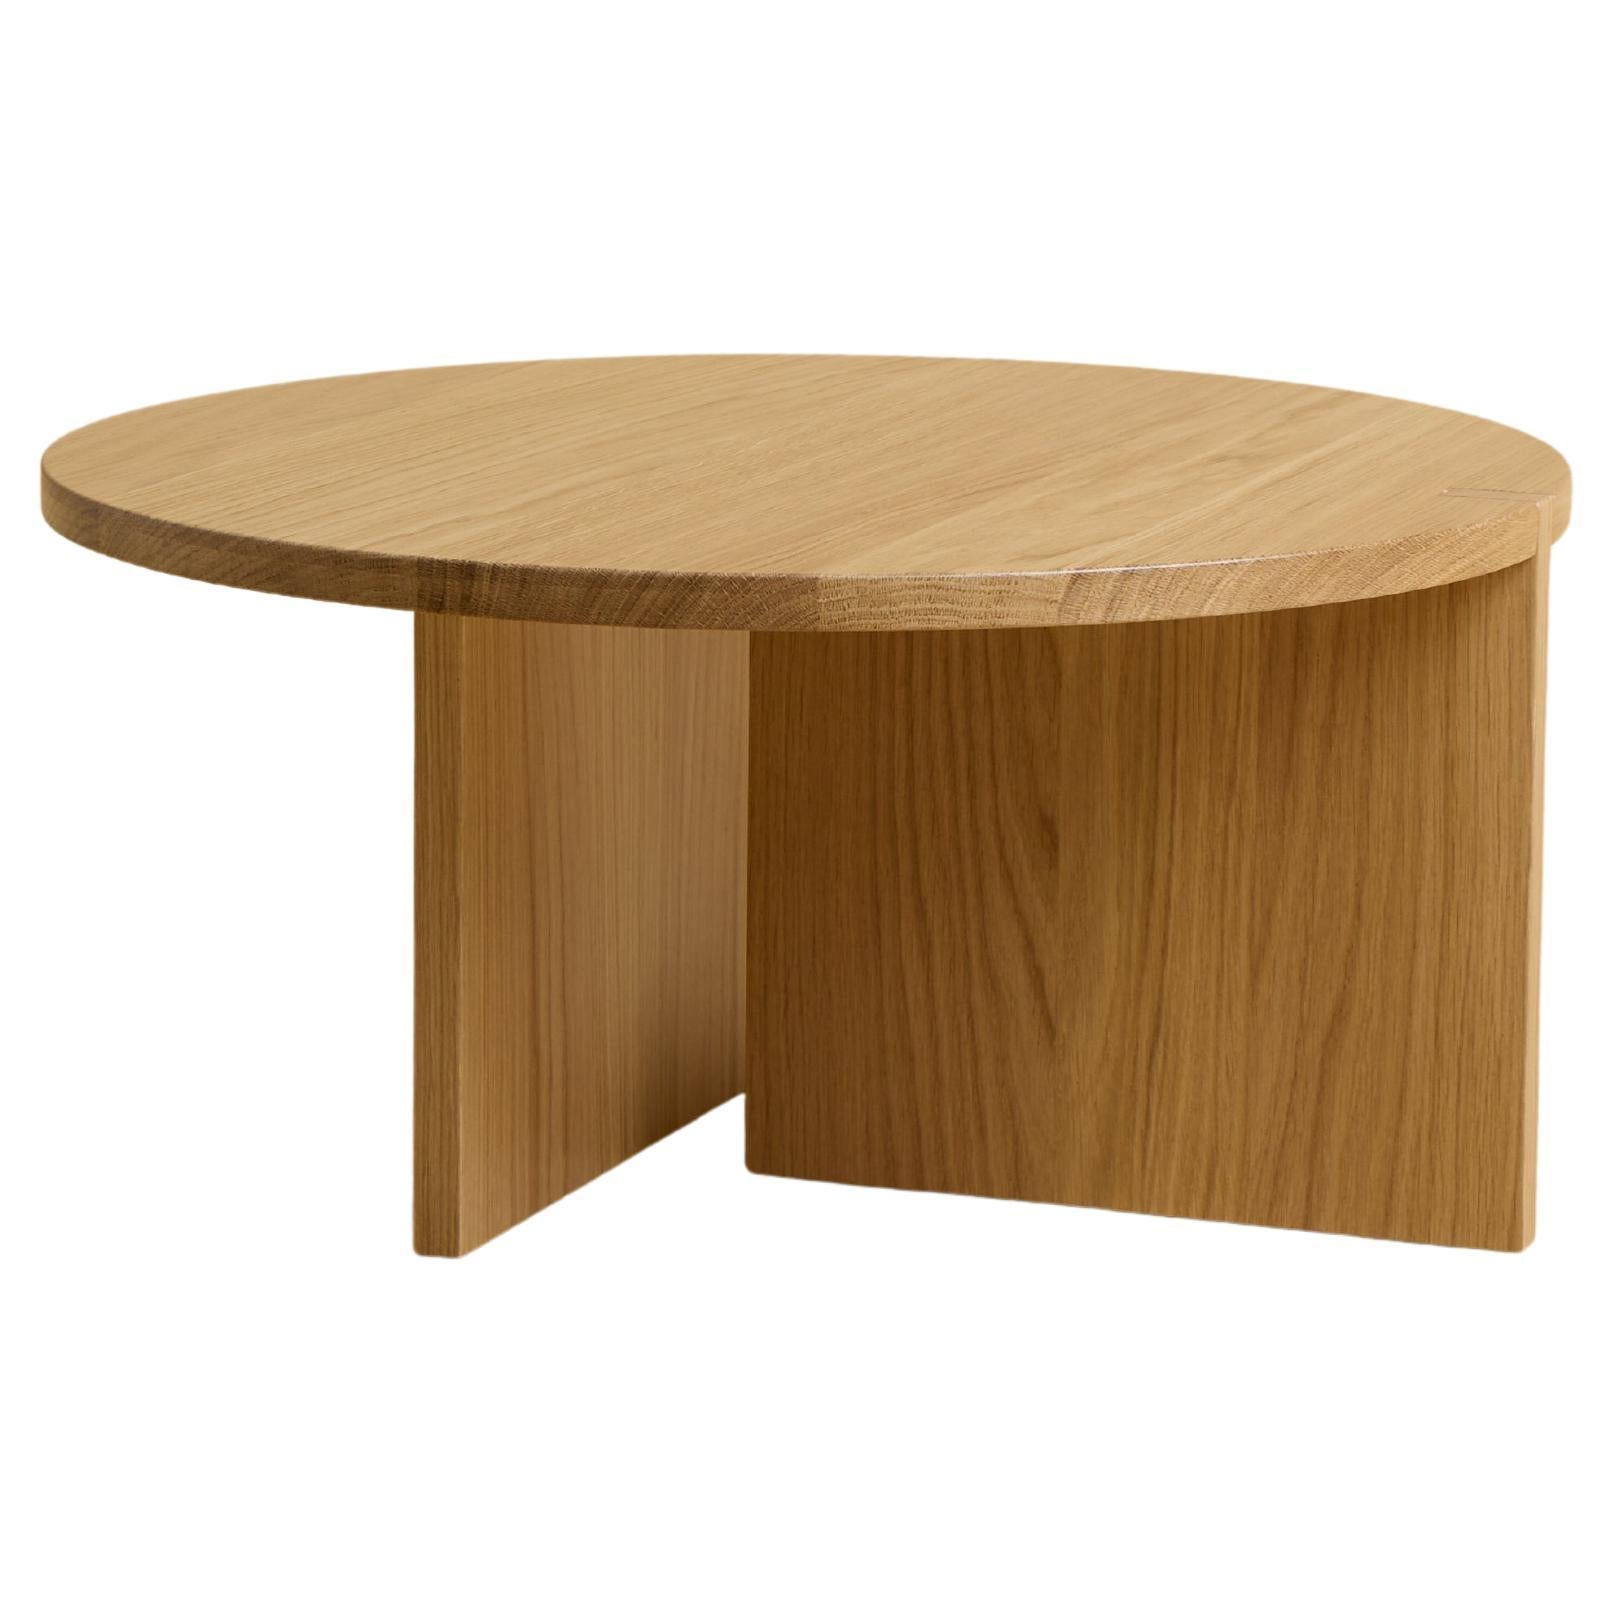 Solid Oak Wood Coffee Table, Made in Italy